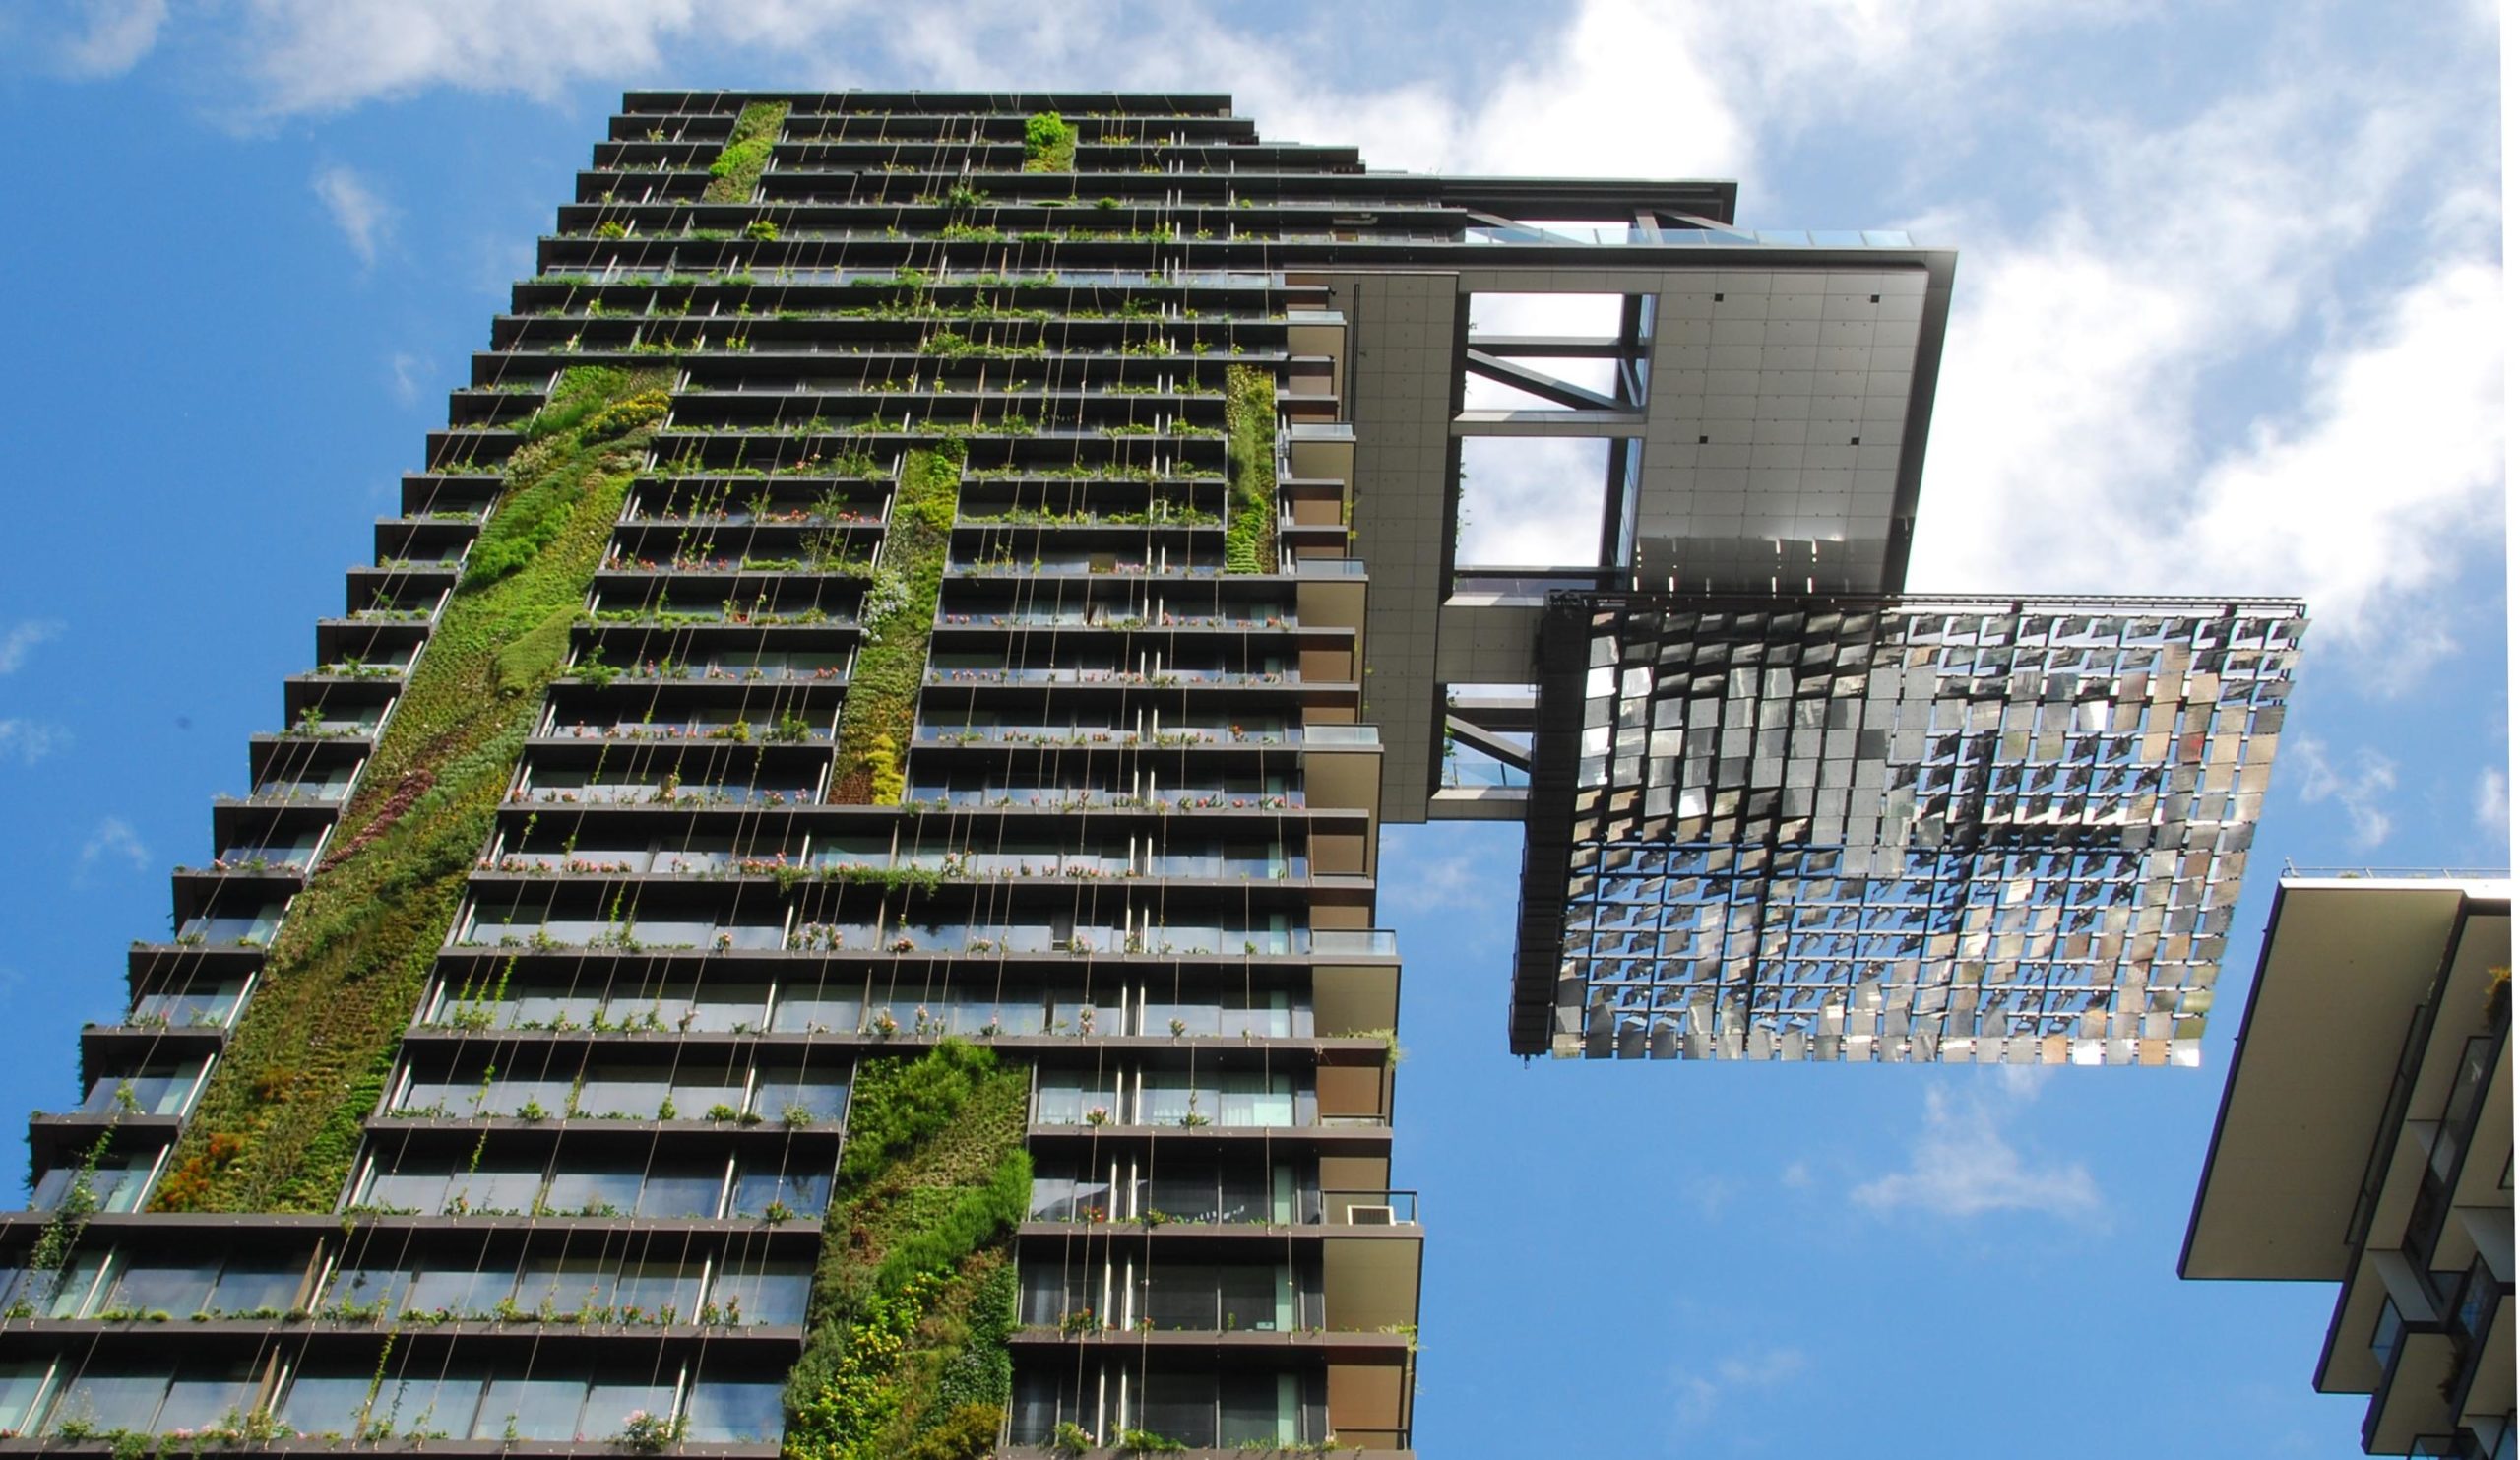 Globally Supported Sustainable Architecture is Environmentally Responsible